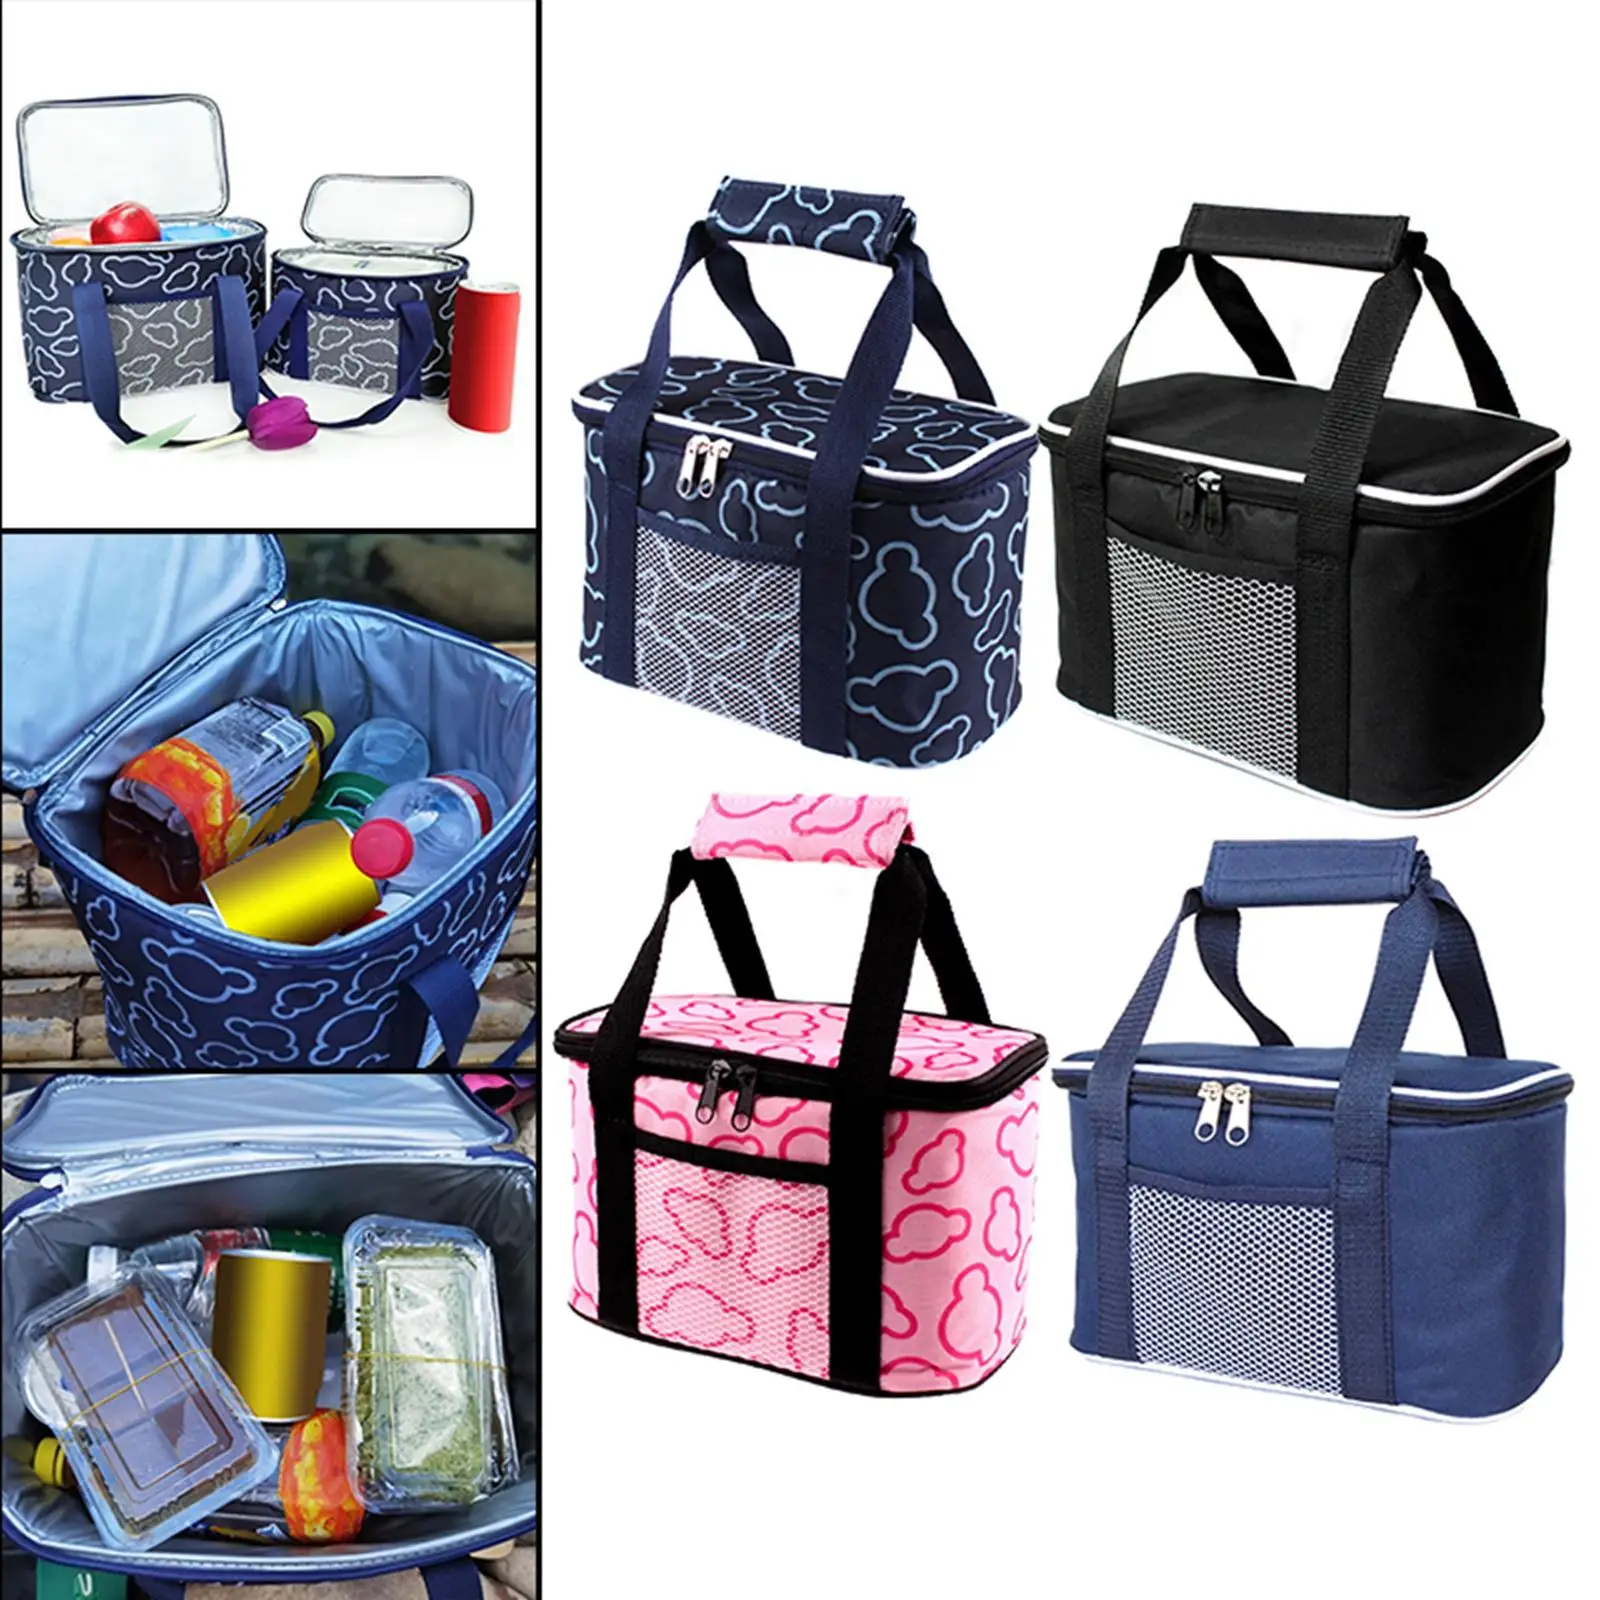 Portable Insulated Lunch Bag Large Capacity Waterproof Leakproof Food Container Pouch for Picnic Office Vacation Travel Outdoor